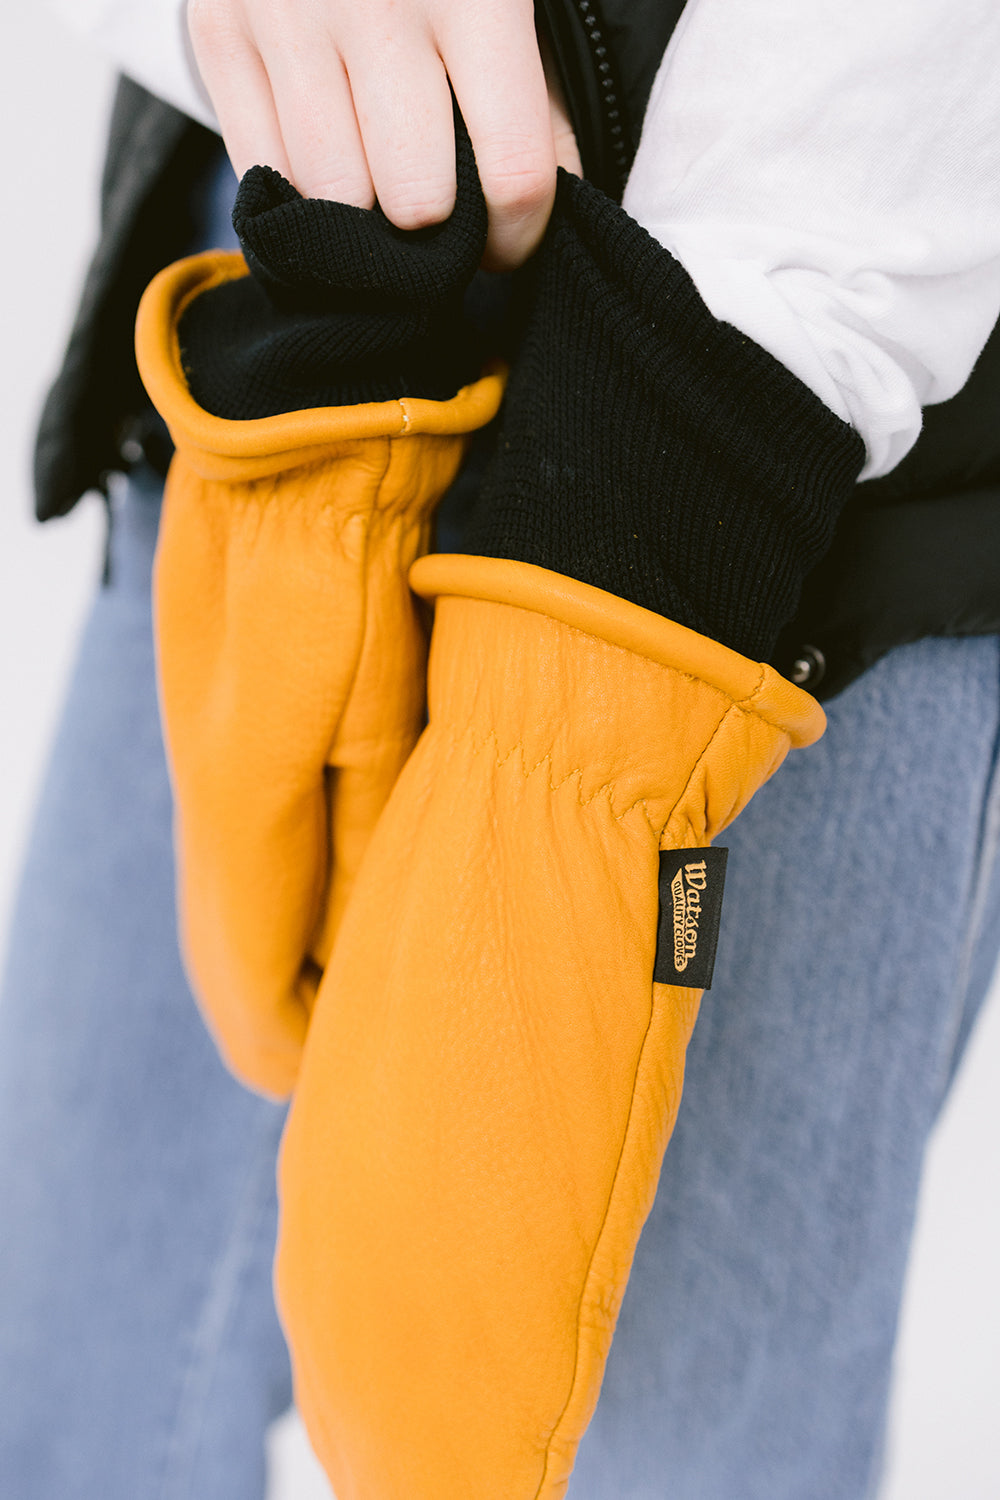 CDN x Watson Gloves Leather Winter Mitts - Local Laundry